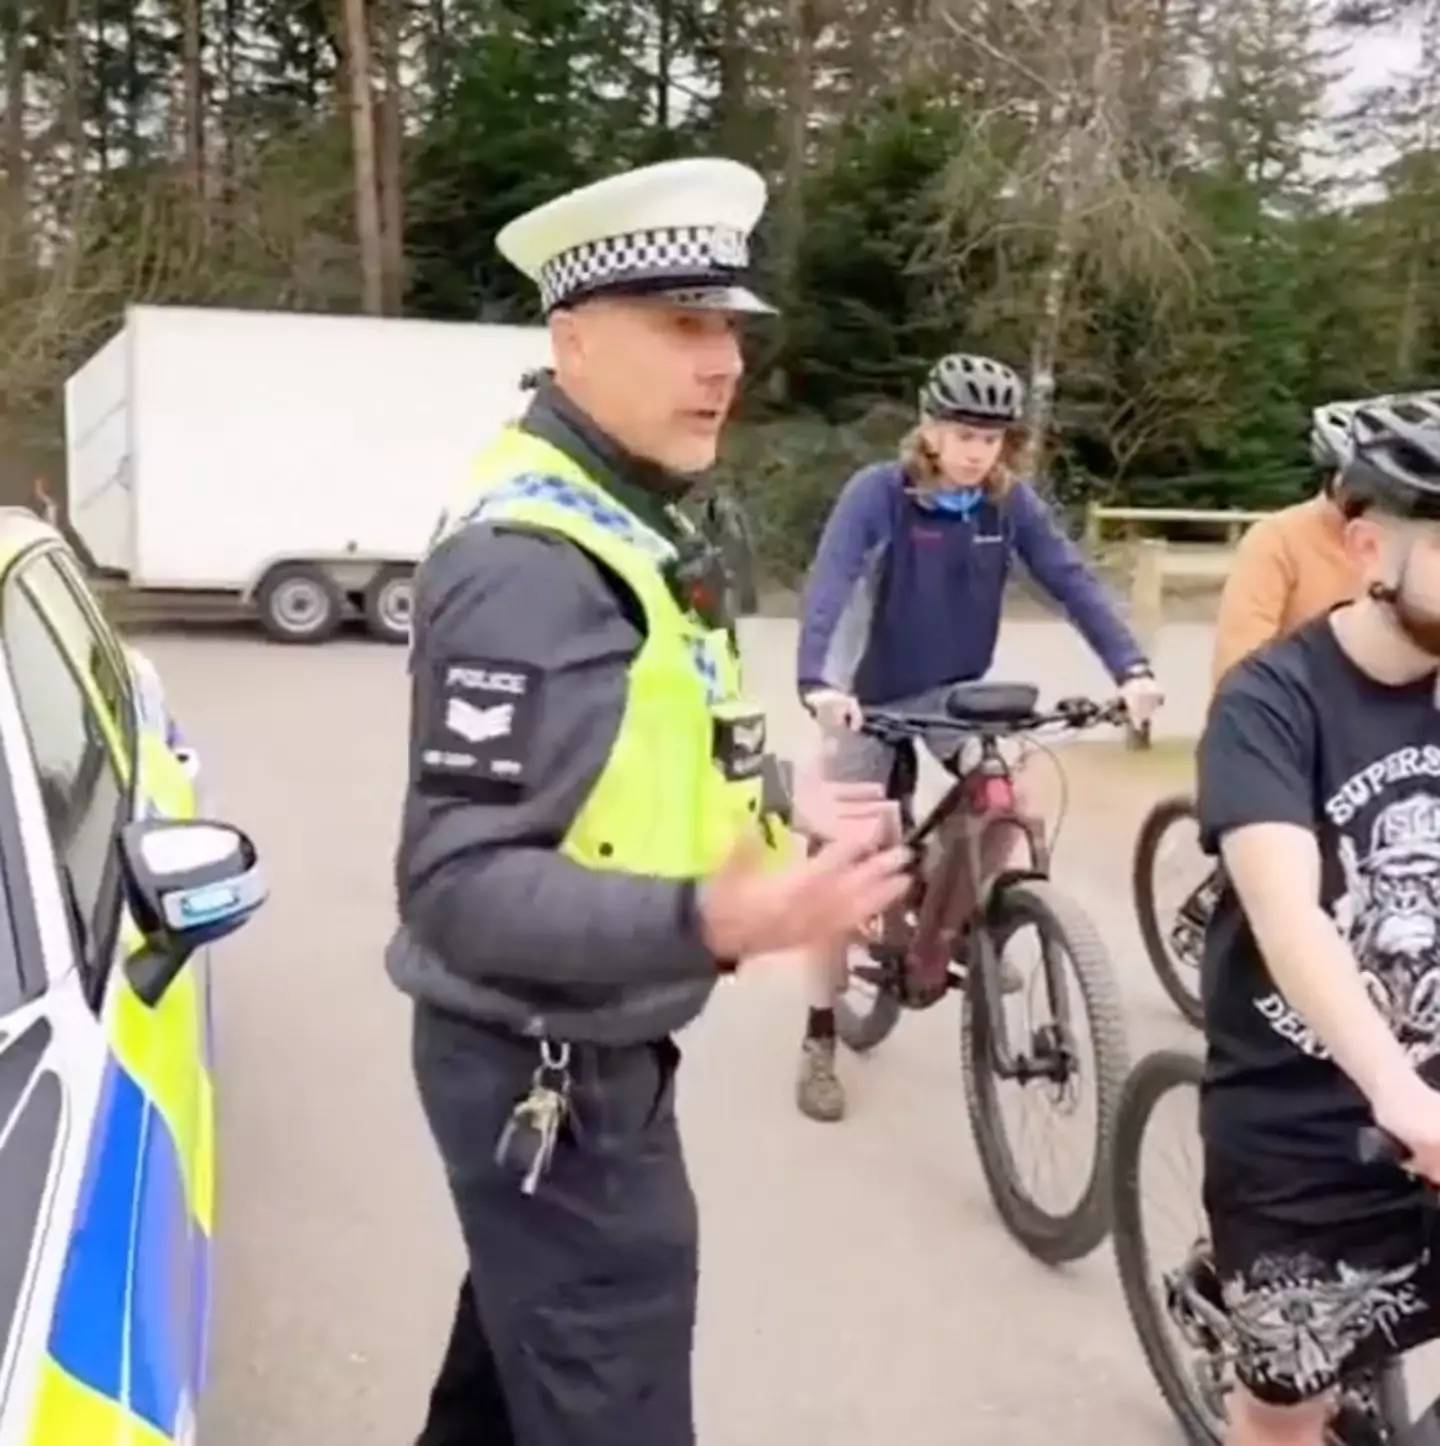 The police officer says it's often better for drivers if cyclists ride in pairs.